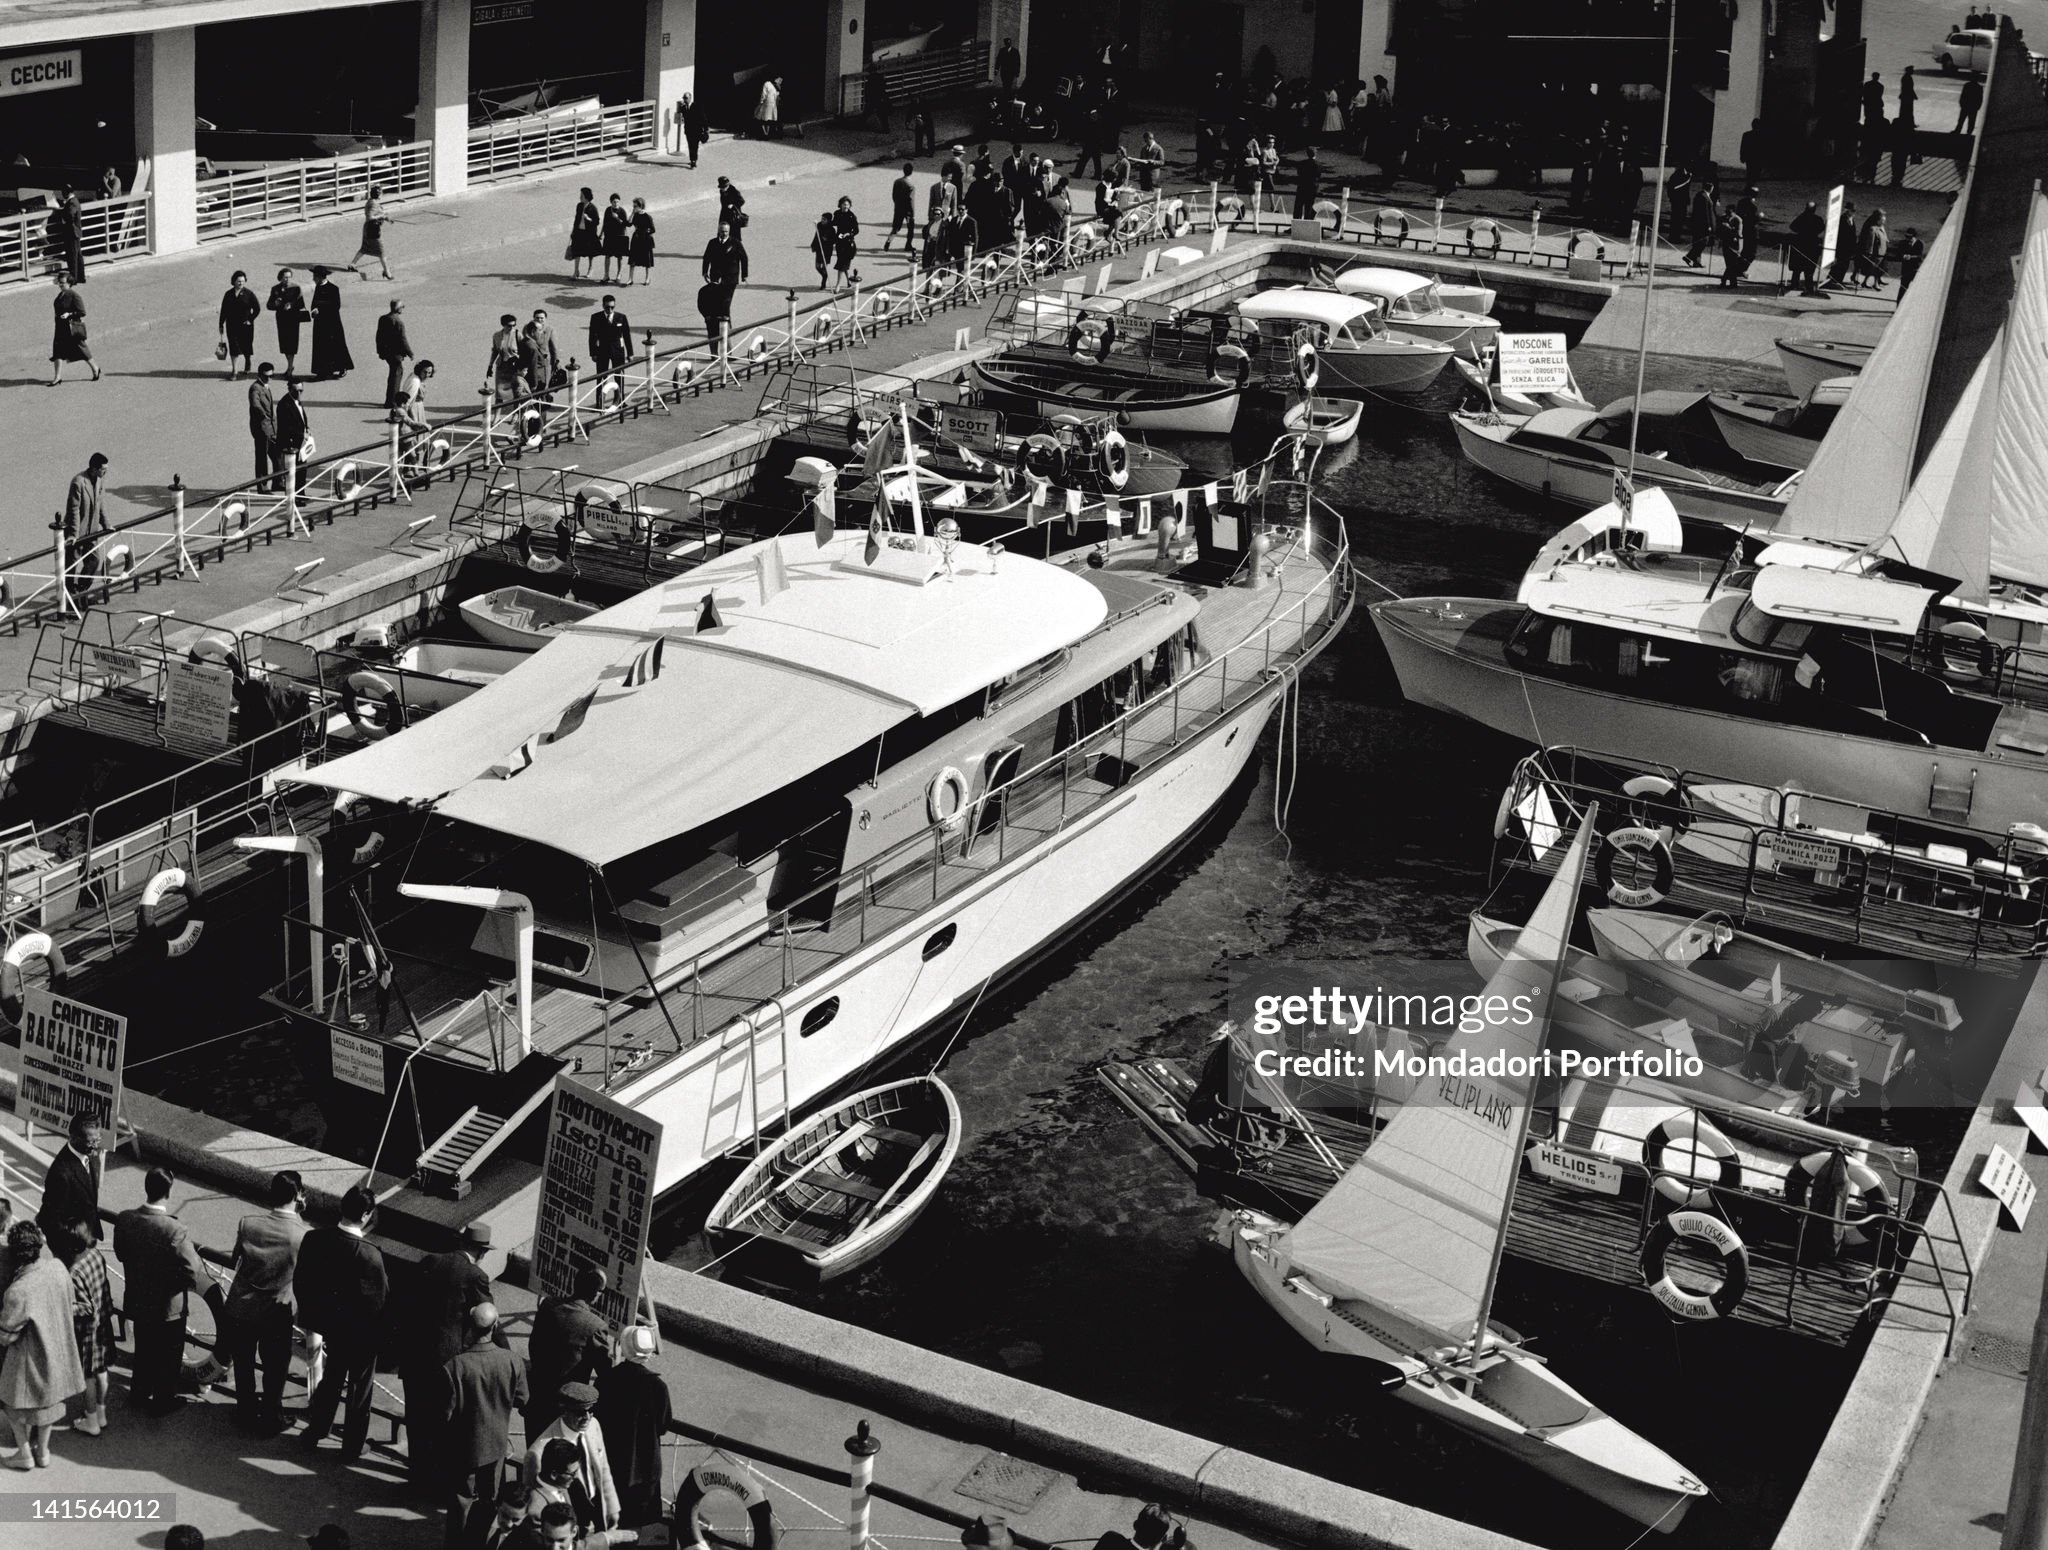 By the motor-boating sector of the 38th edition of Milan Trade Fair, a crowd of visitors is watching a big yacht moored next to motor-boats and sailing boats in 1960. 